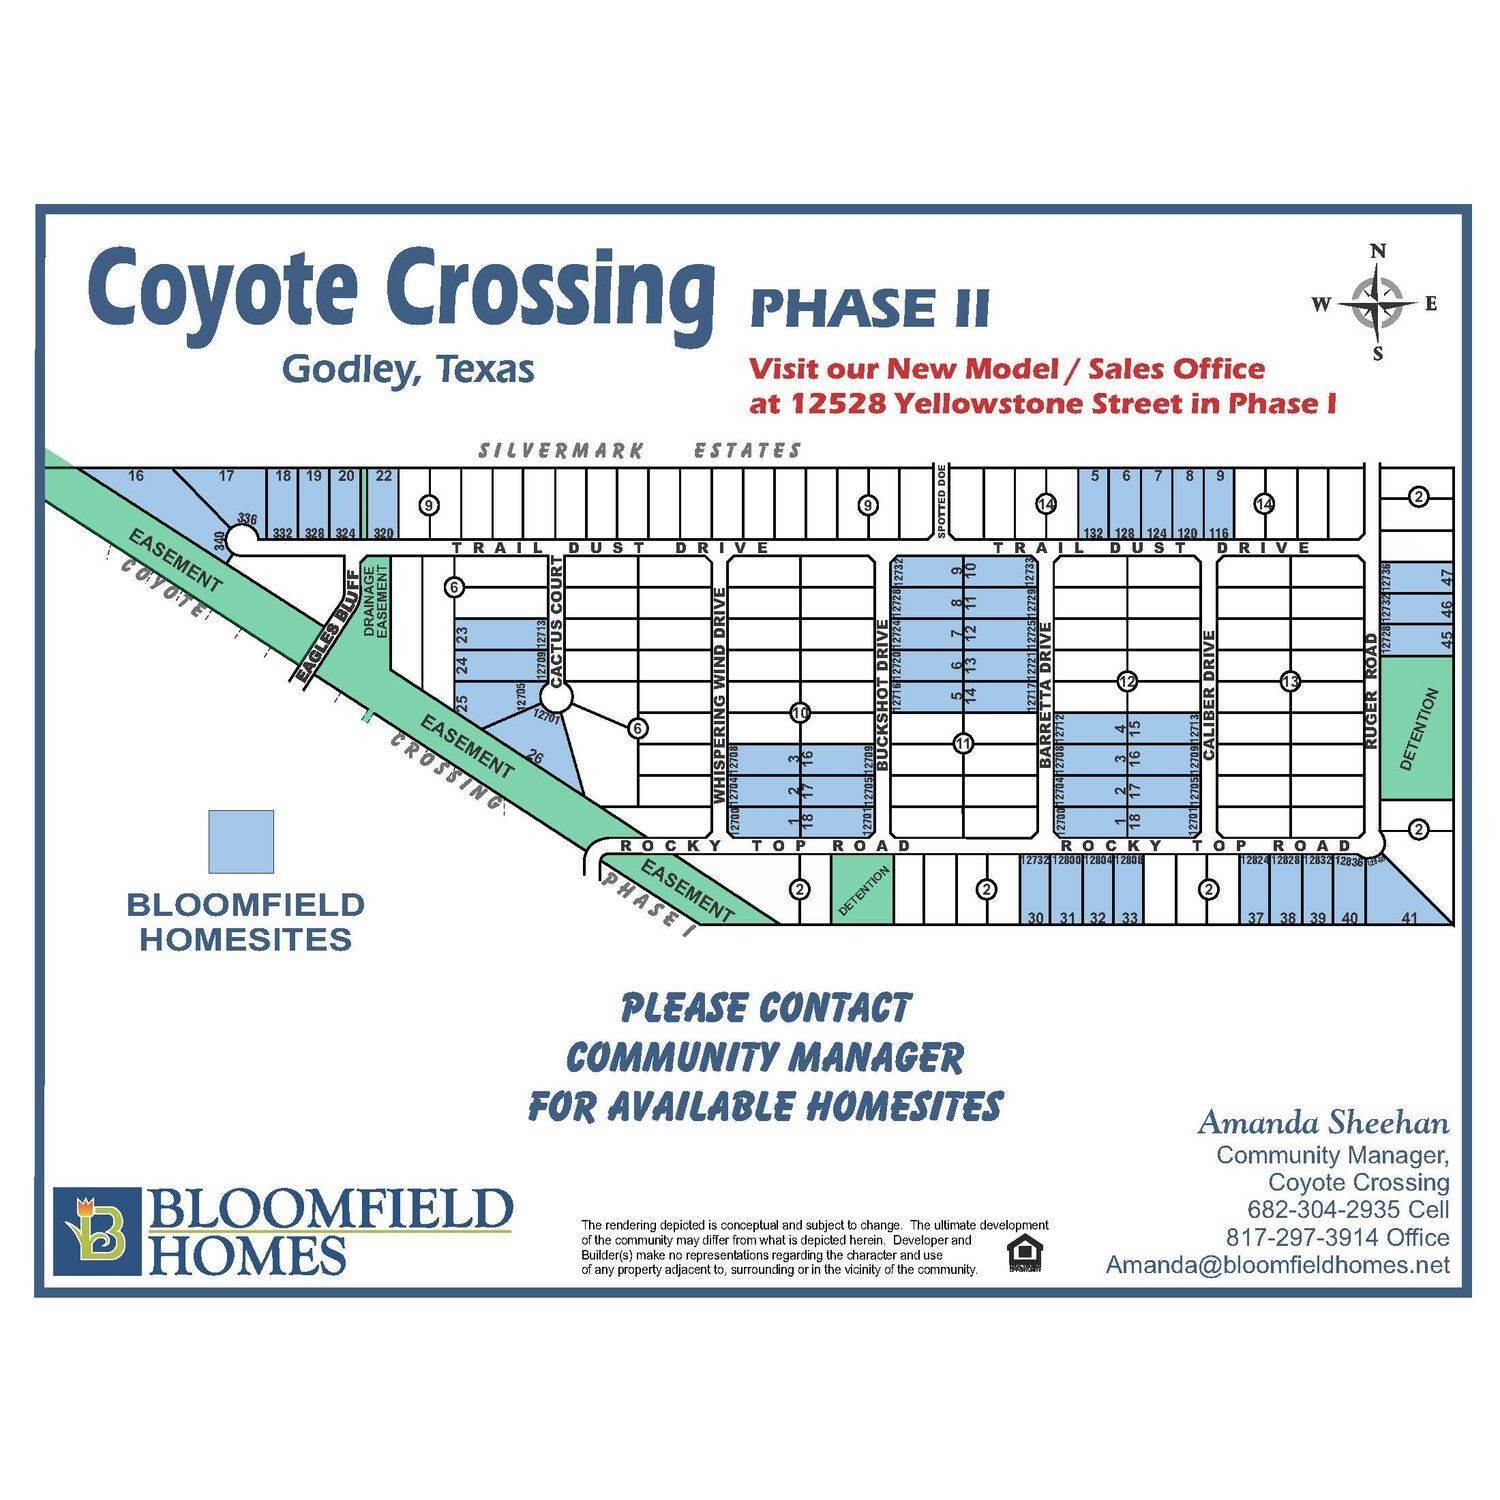 2. Coyote Crossing building at 12528 Yellowstone Street, Godley, TX 76044